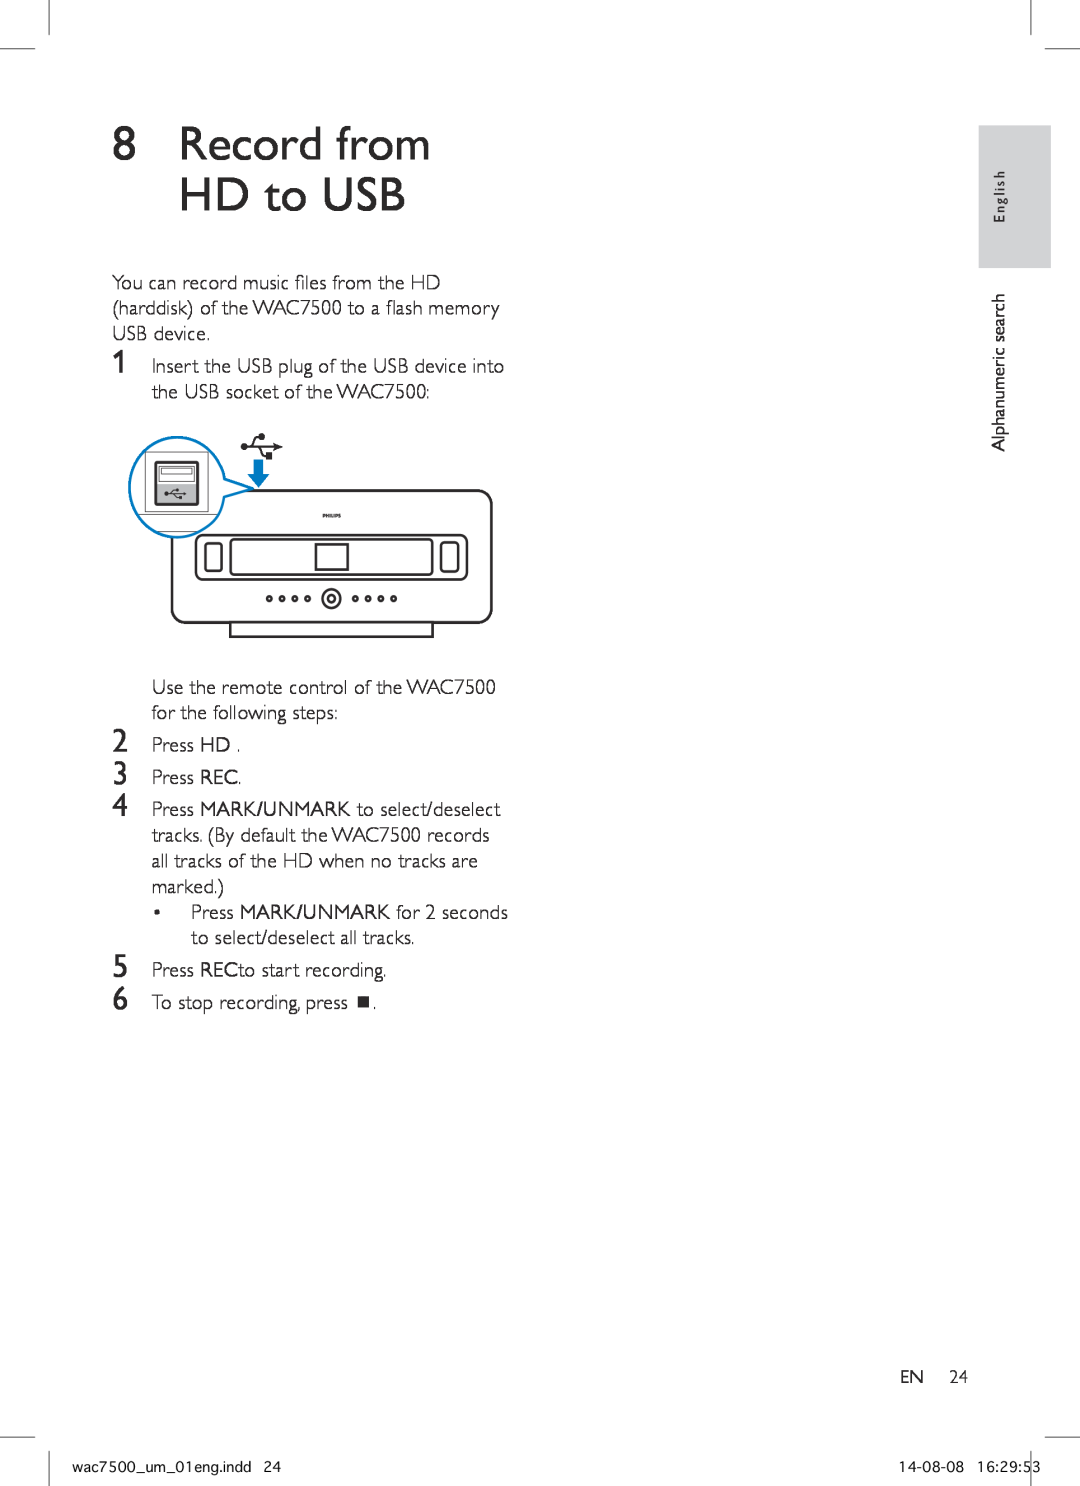 Philips WAC7500 user manual 8Record from HD to USB, Alphanumeric search English, wac7500 um 01eng.indd, 14-08-0816 